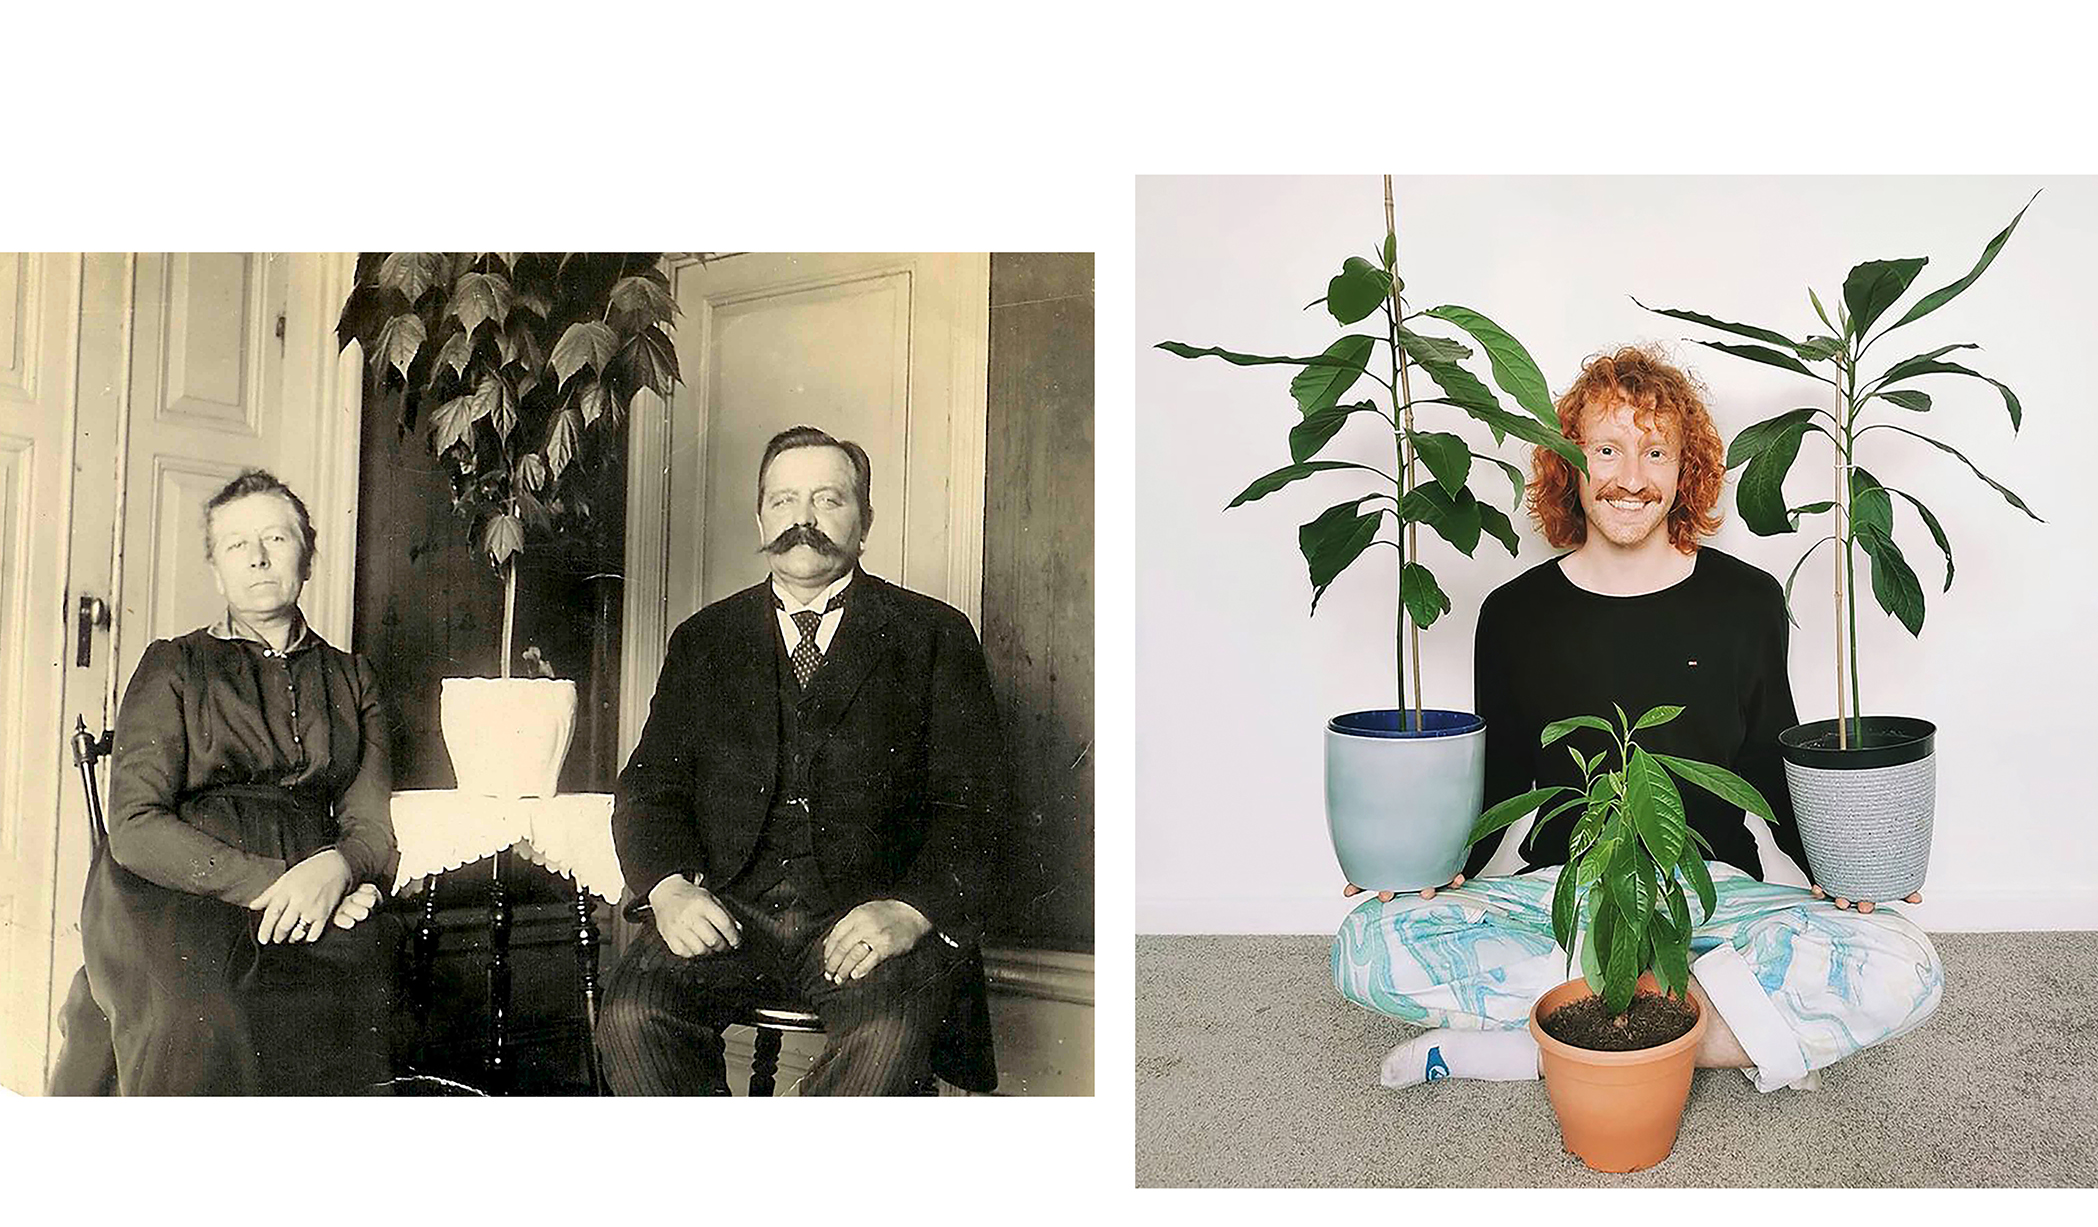 links: Unbekanntes Paar. Schweden. Circa 1910   rechts:  »A wise man (me) once said (just now) you can never have too many avocado plants. Do I need another one? Not really. Do I have one propogating in my kitchen? Absolutely.  [...]« @_ginger_roots. 2021